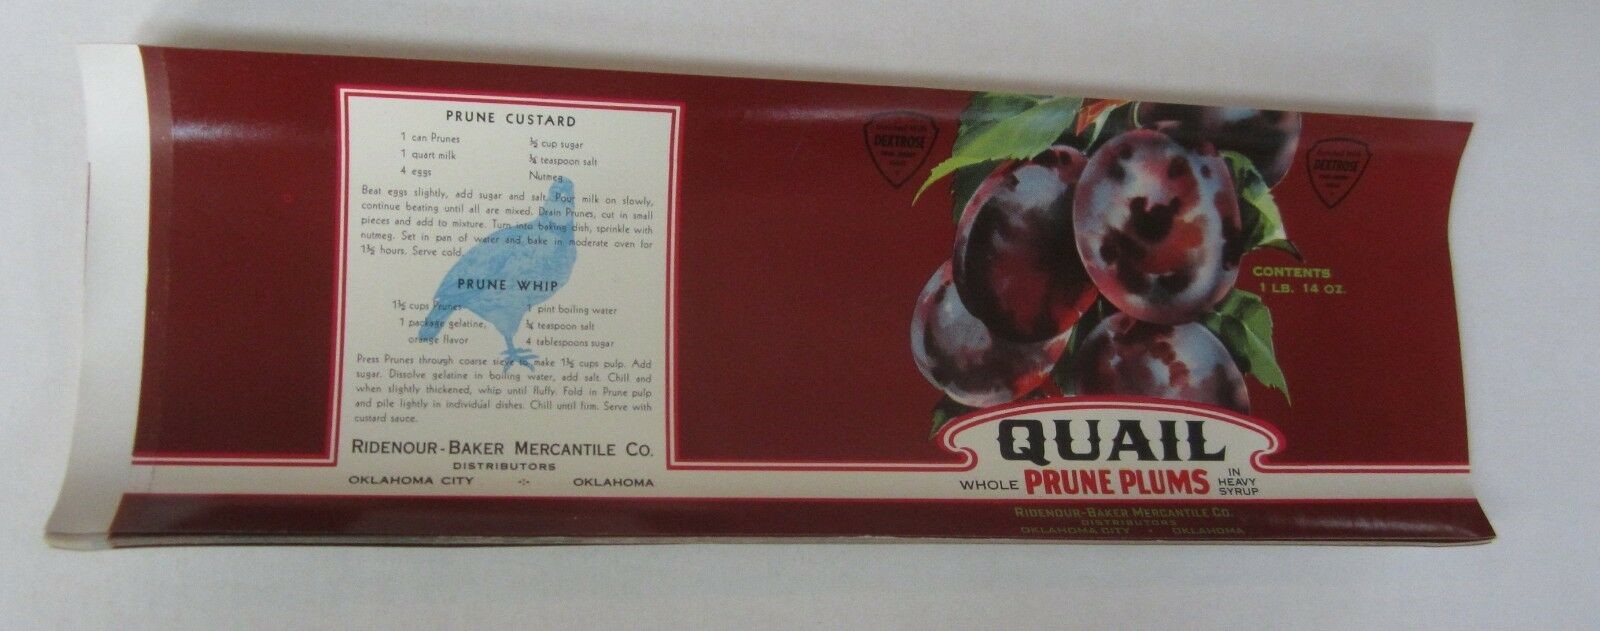  Lot of 50 Old Vintage - QUAIL Prune Plums CAN ...